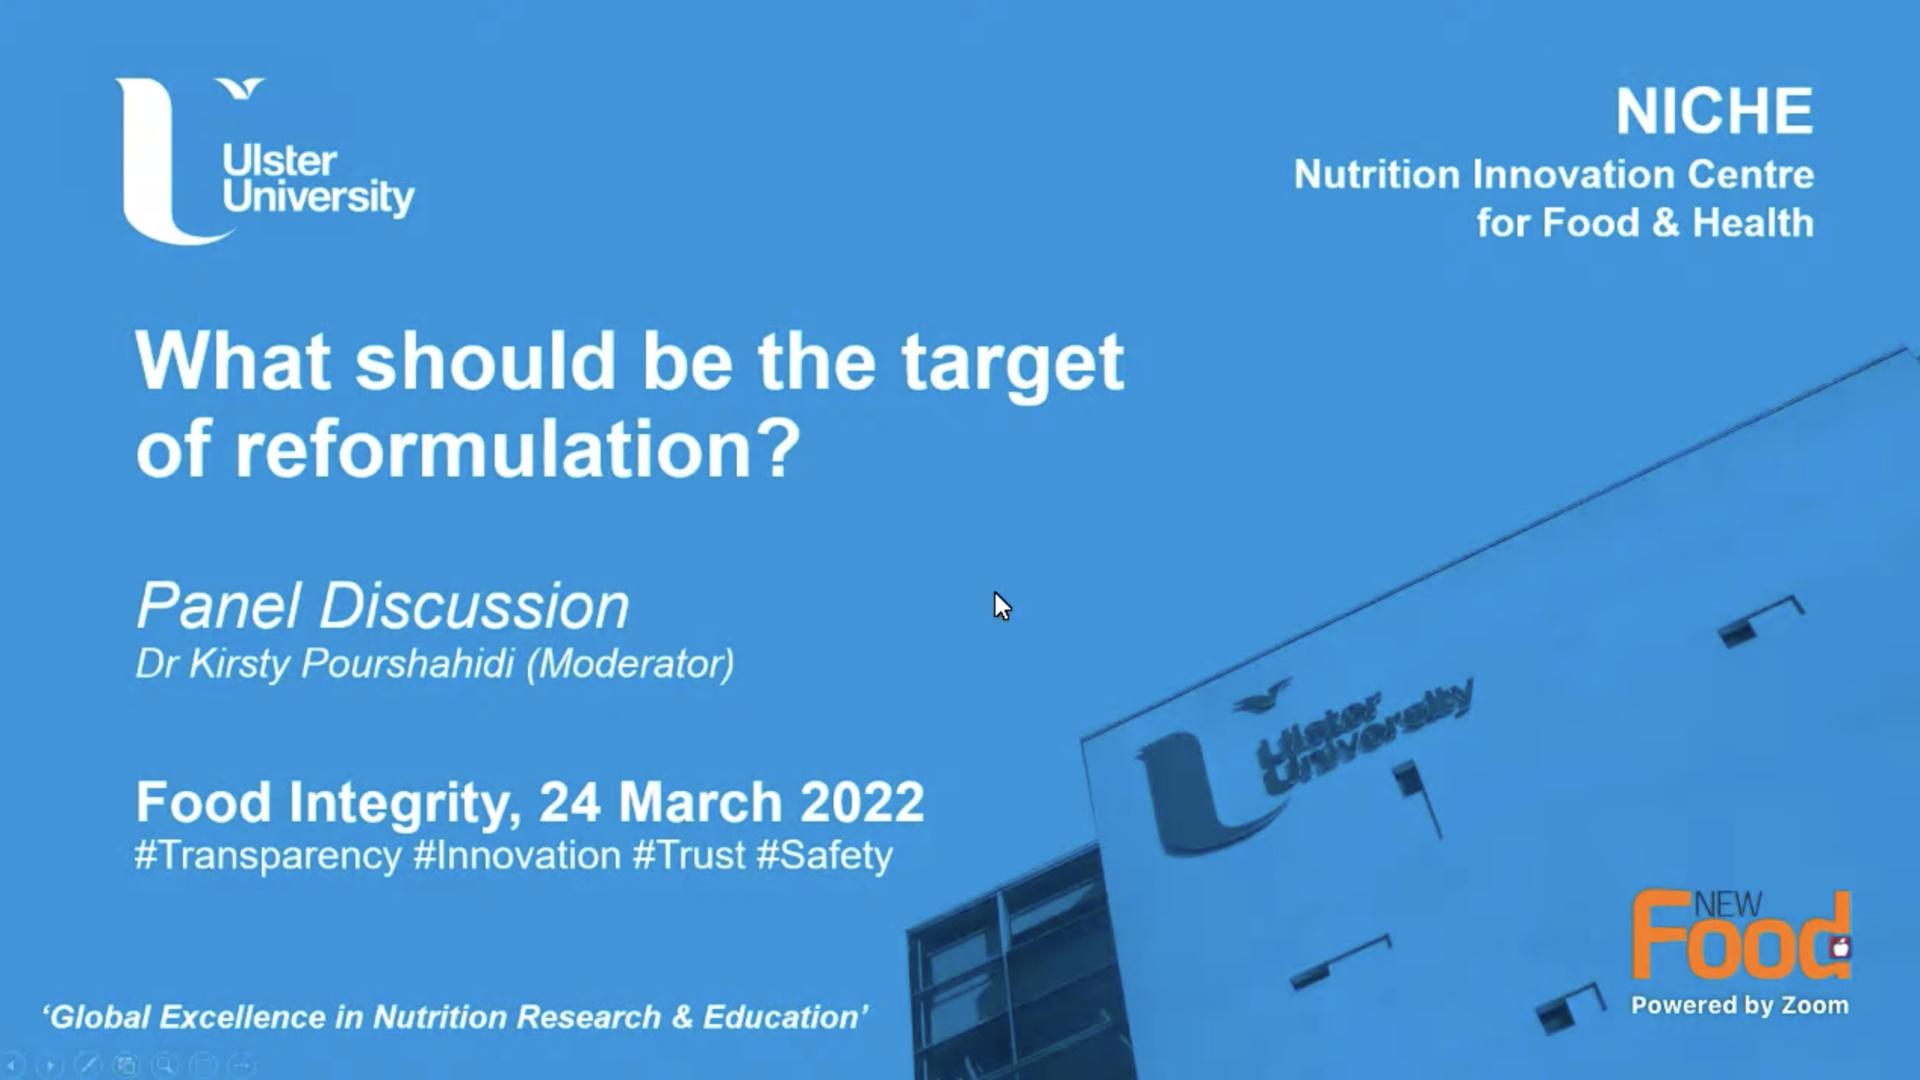 New Food - What should be the target of reformulation?